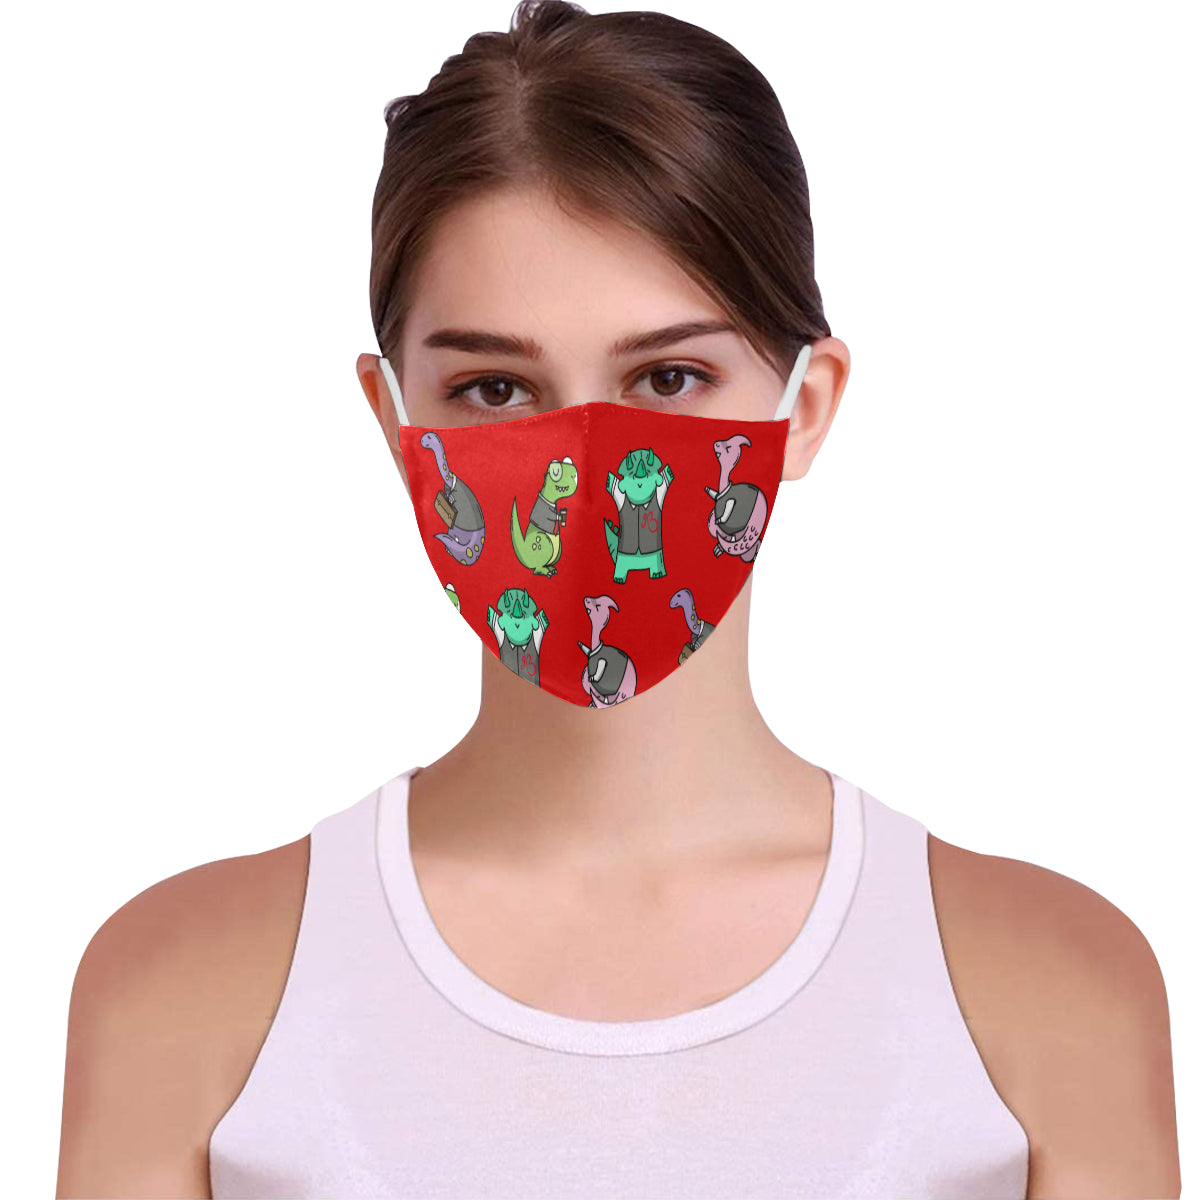 Dino's at Work Cotton Fabric Face Mask with Filter Slot & Adjustable Strap - Non-medical use (2 Filters Included)